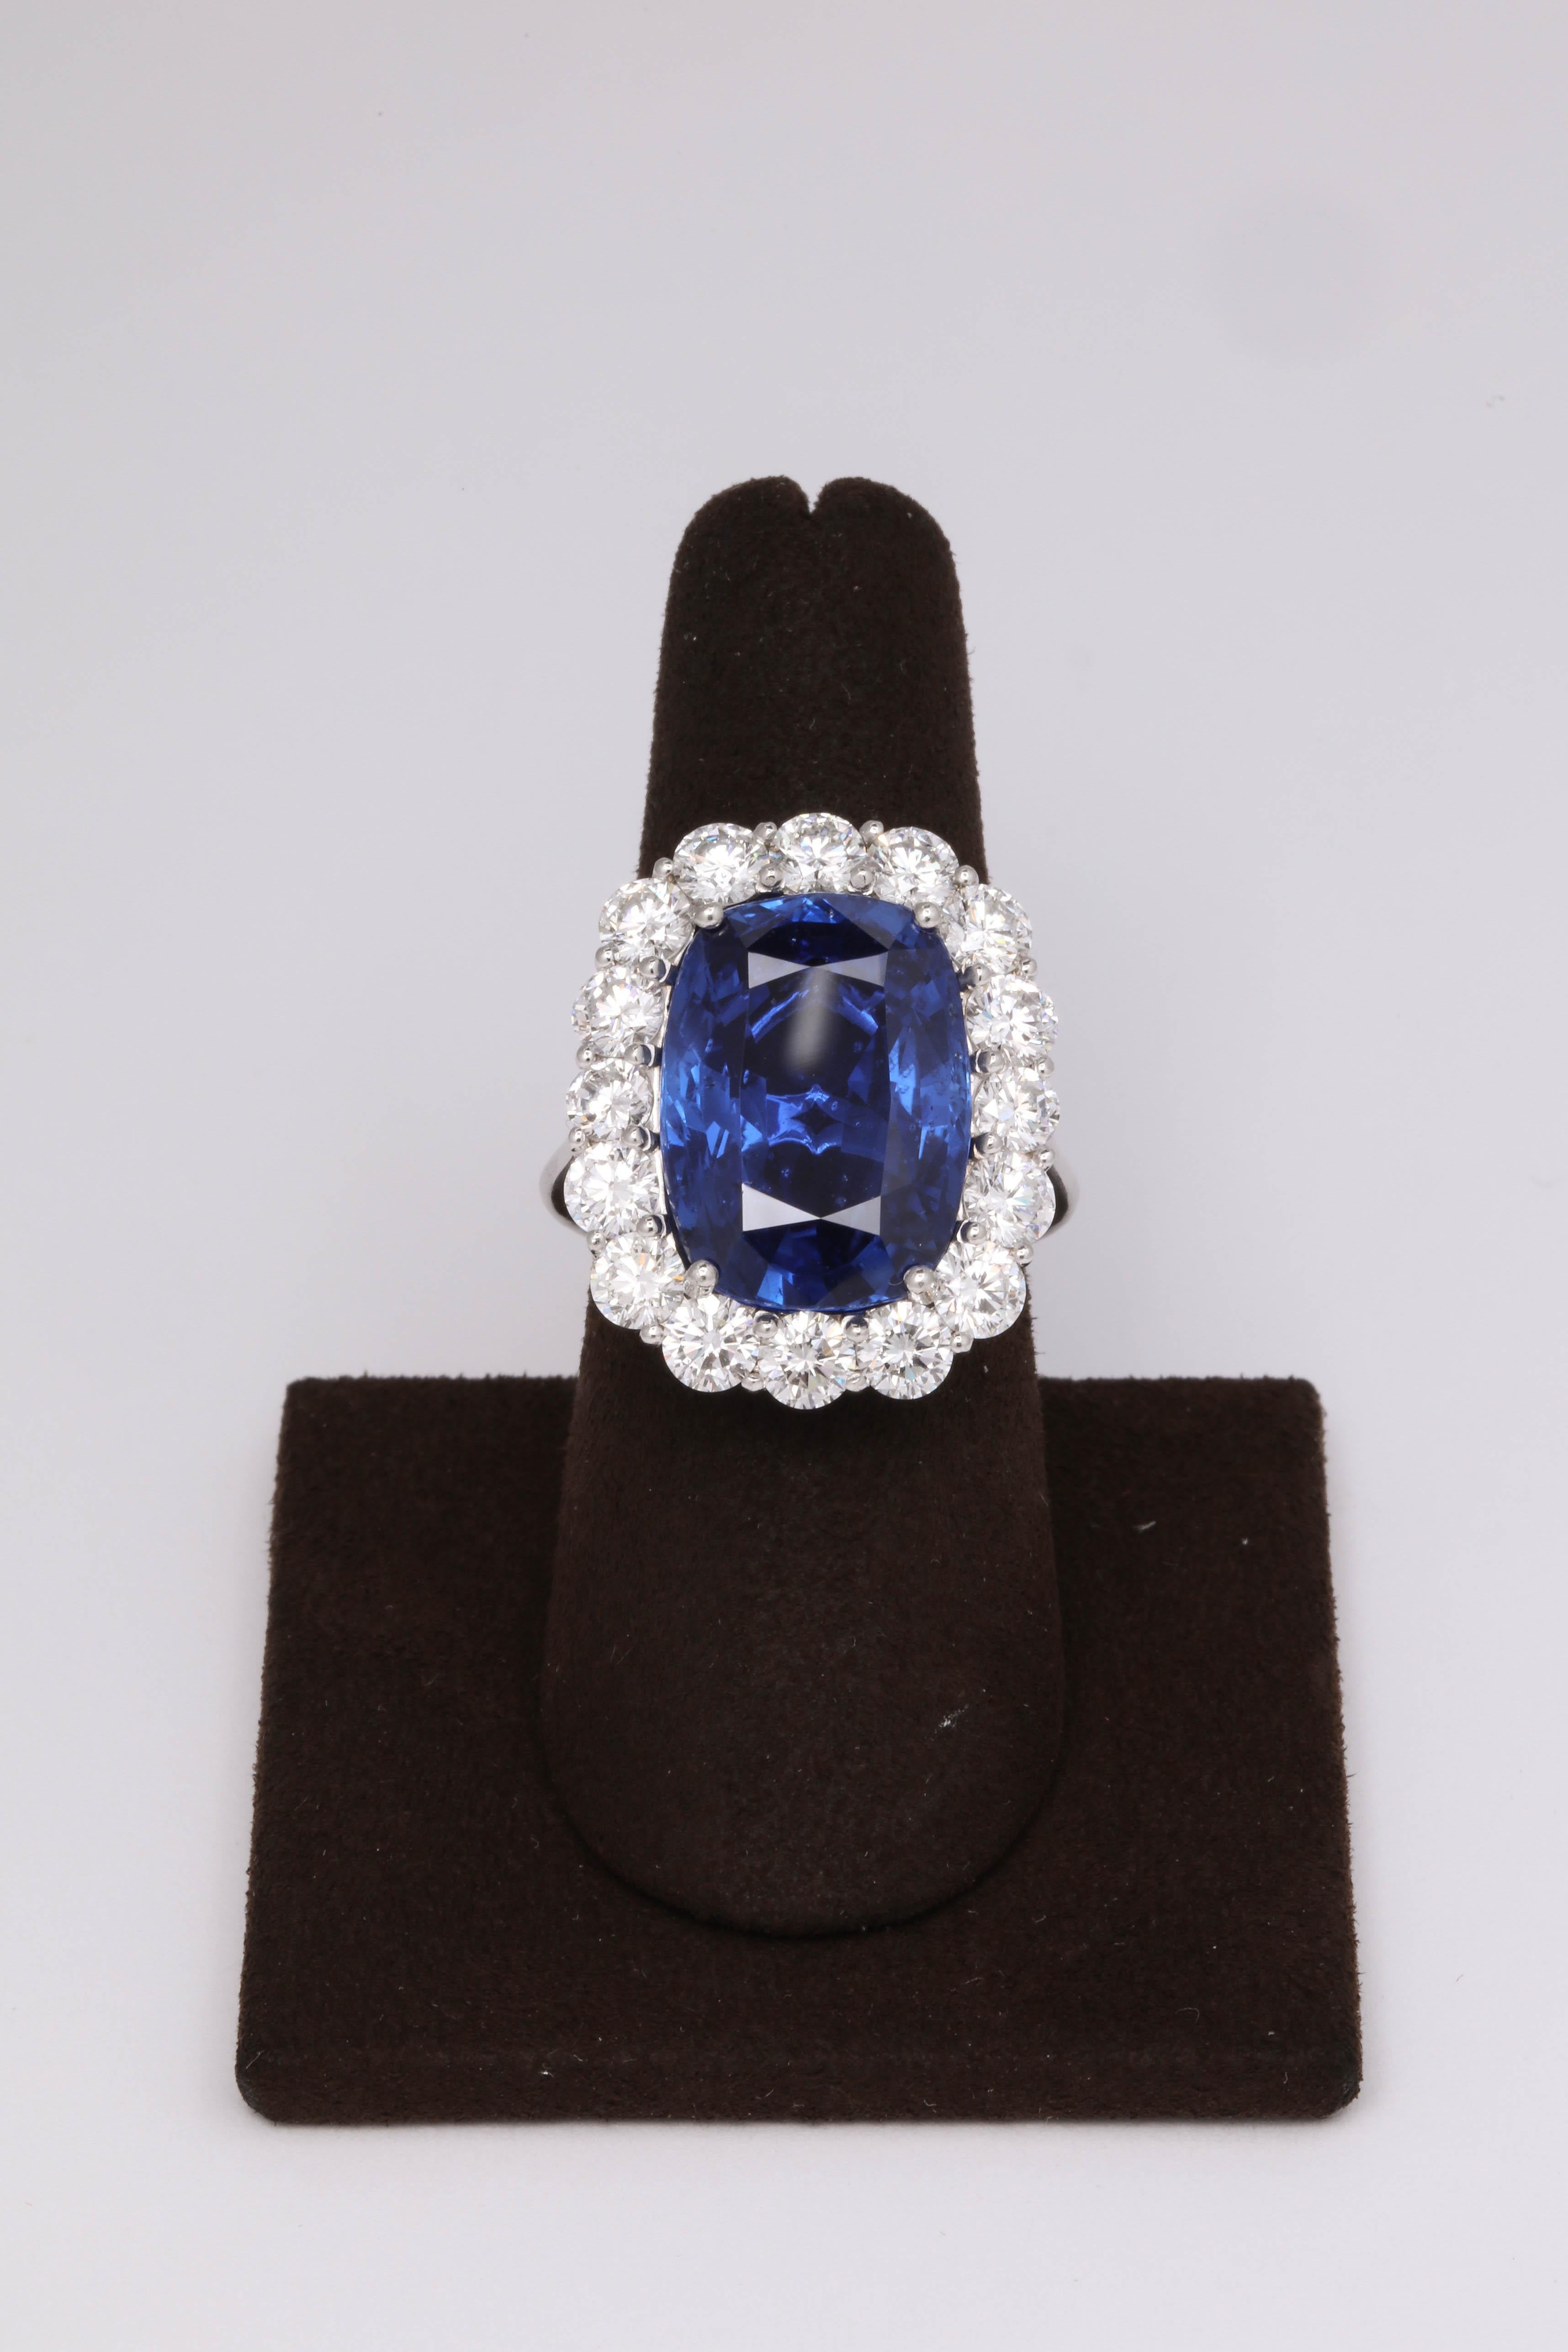 
An INCREDIBLE ring!    A RARE find!

Certified 19.19 carat Ceylon Natural No Heat Blue Sapphire with exquisite color and brilliance. 

4 carats of round brilliant cut diamonds 

Set in platinum 

The ring is currently a size 6.5 but can easily be